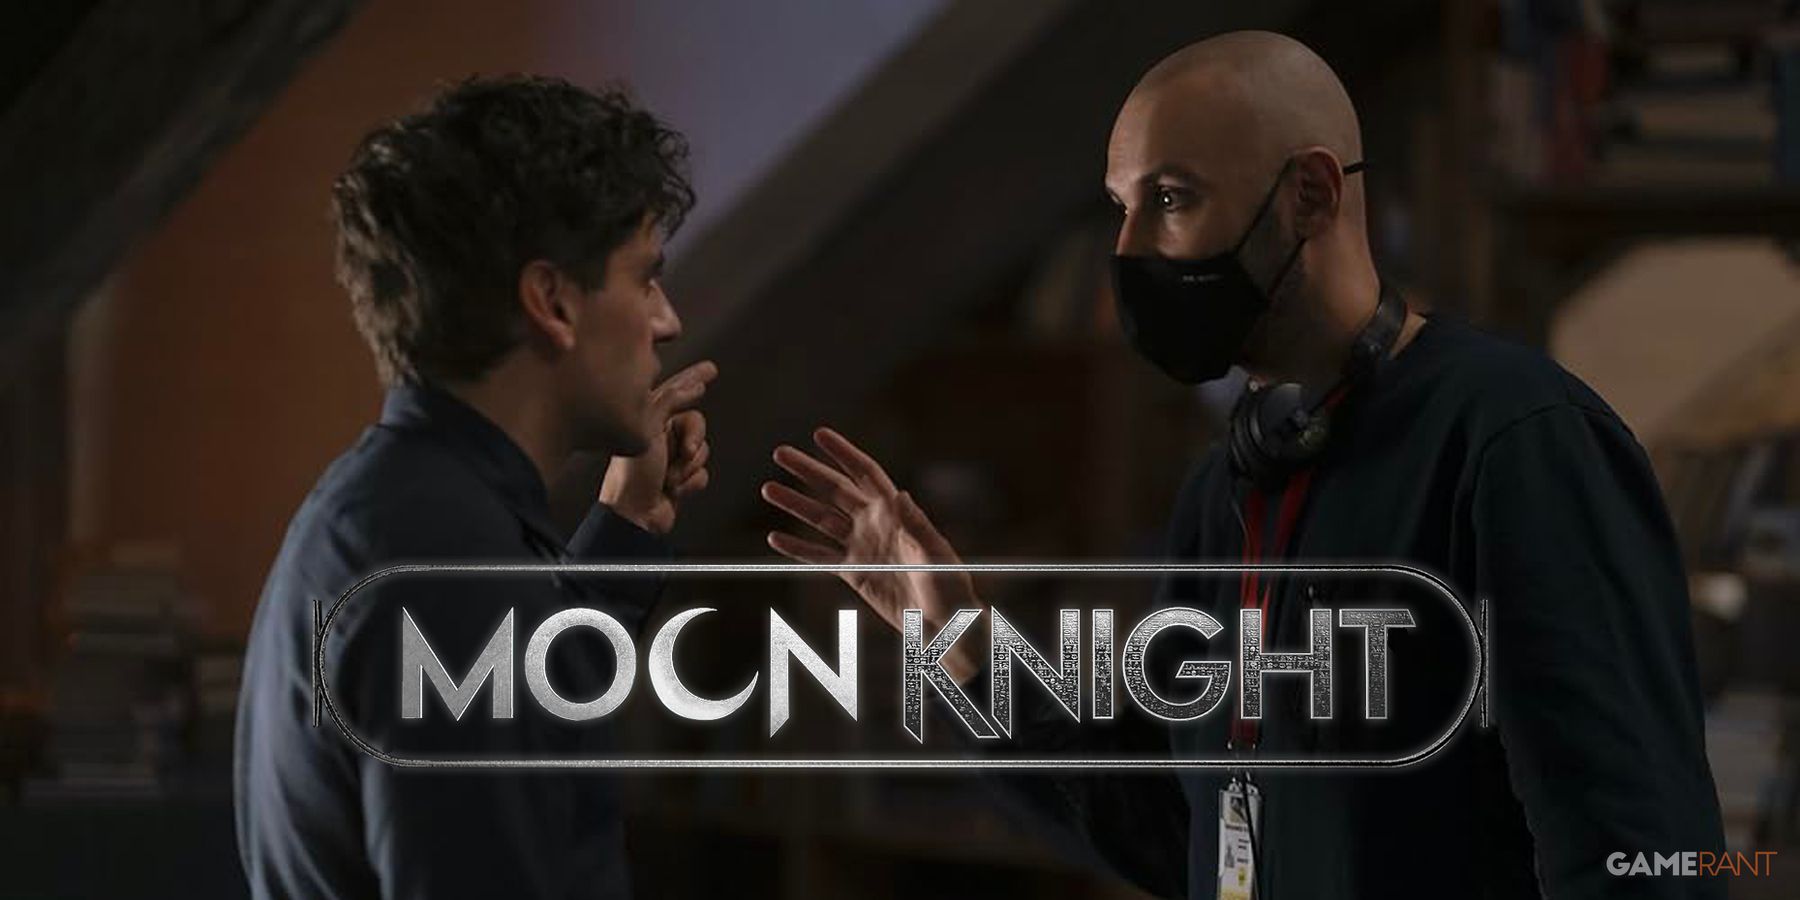 Moon Knight Season 2 Receives Discouraging Update From Producer